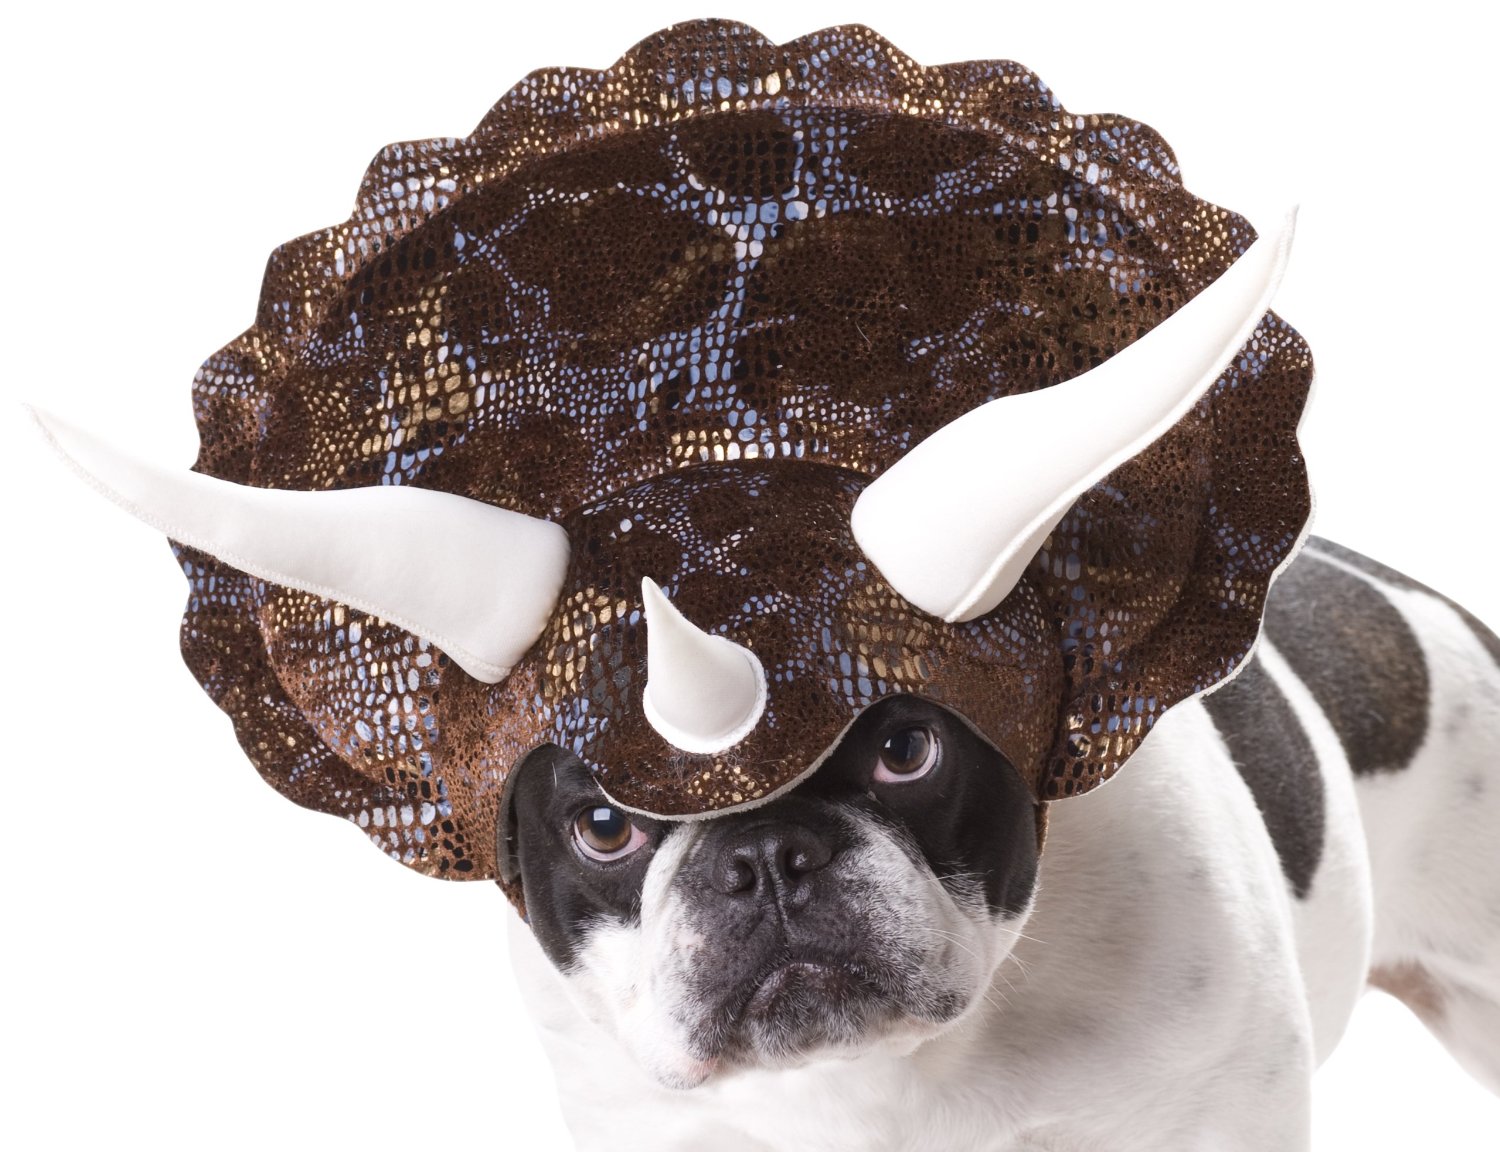 Dogs In Ridiculous Halloween Costumes. How Shameful!